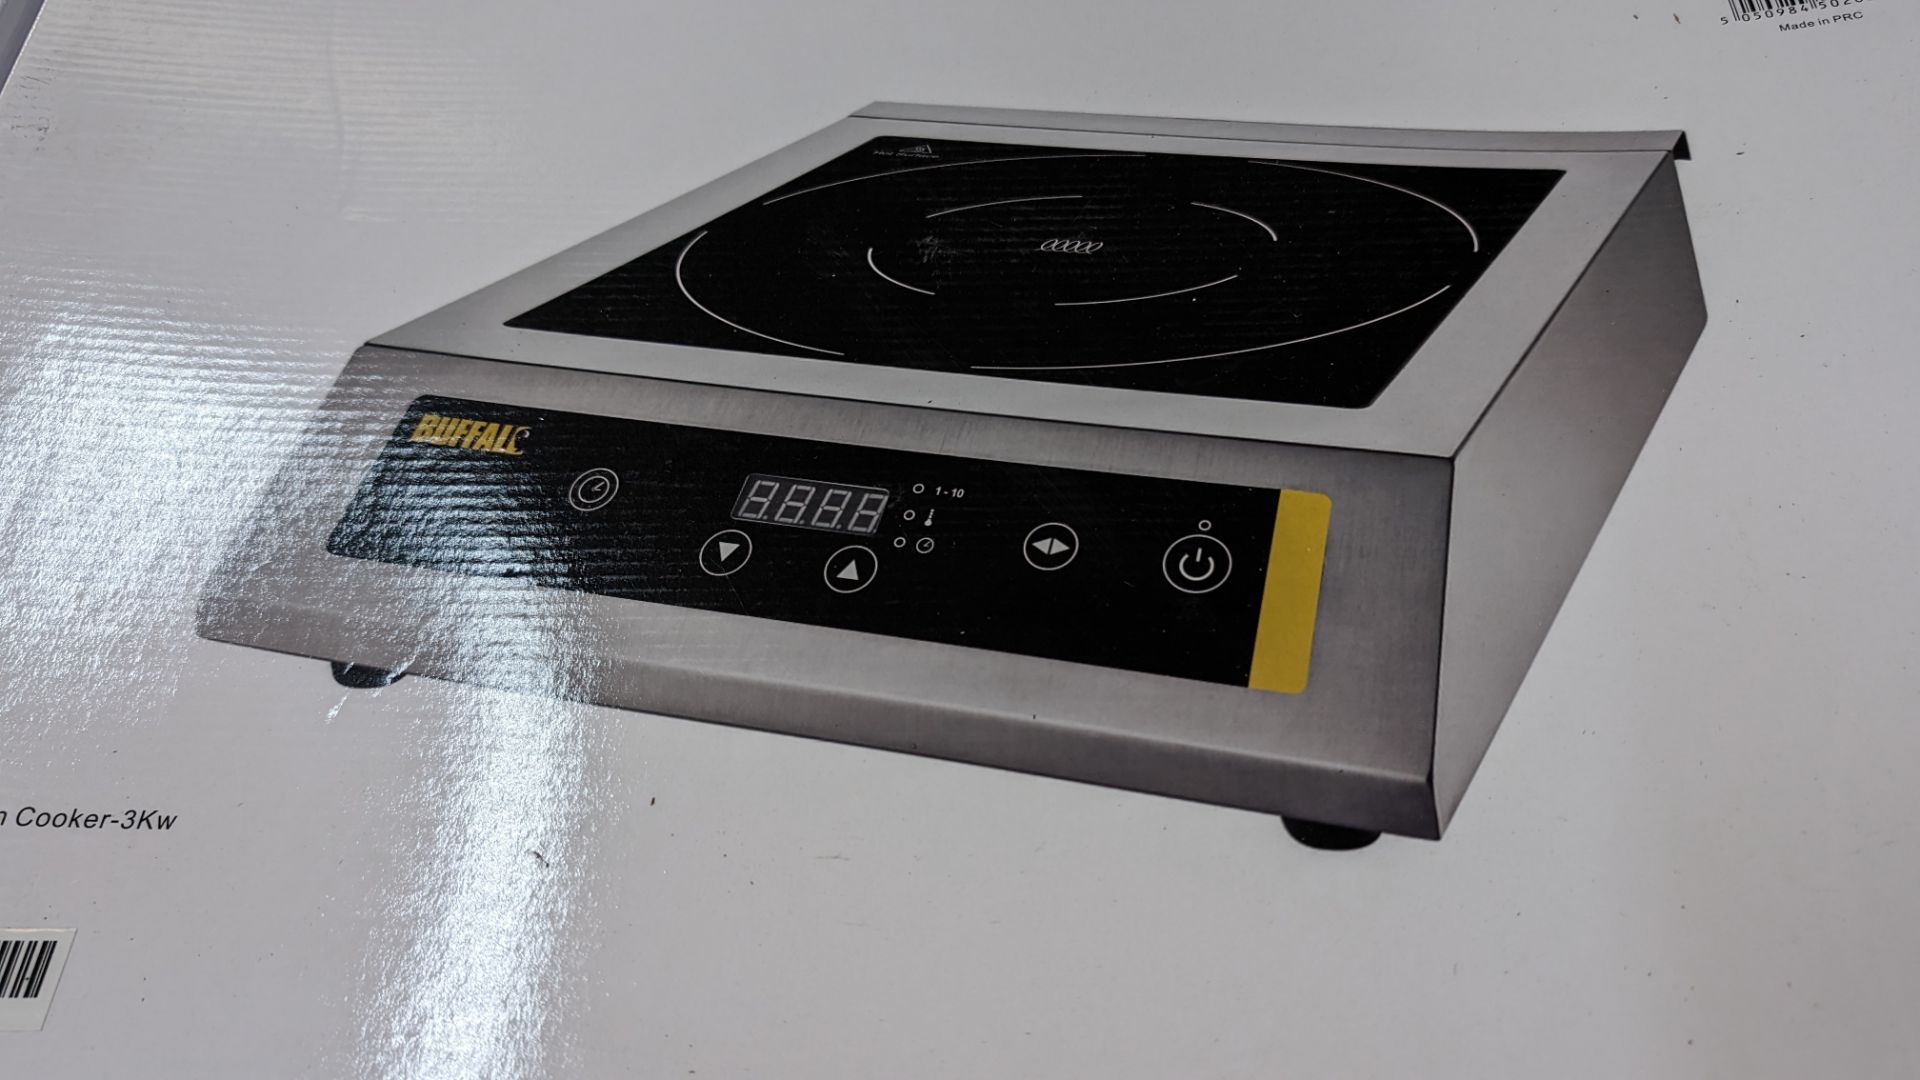 Buffalo heavy duty induction hob - includes box and appears new and unused - Bild 4 aus 6